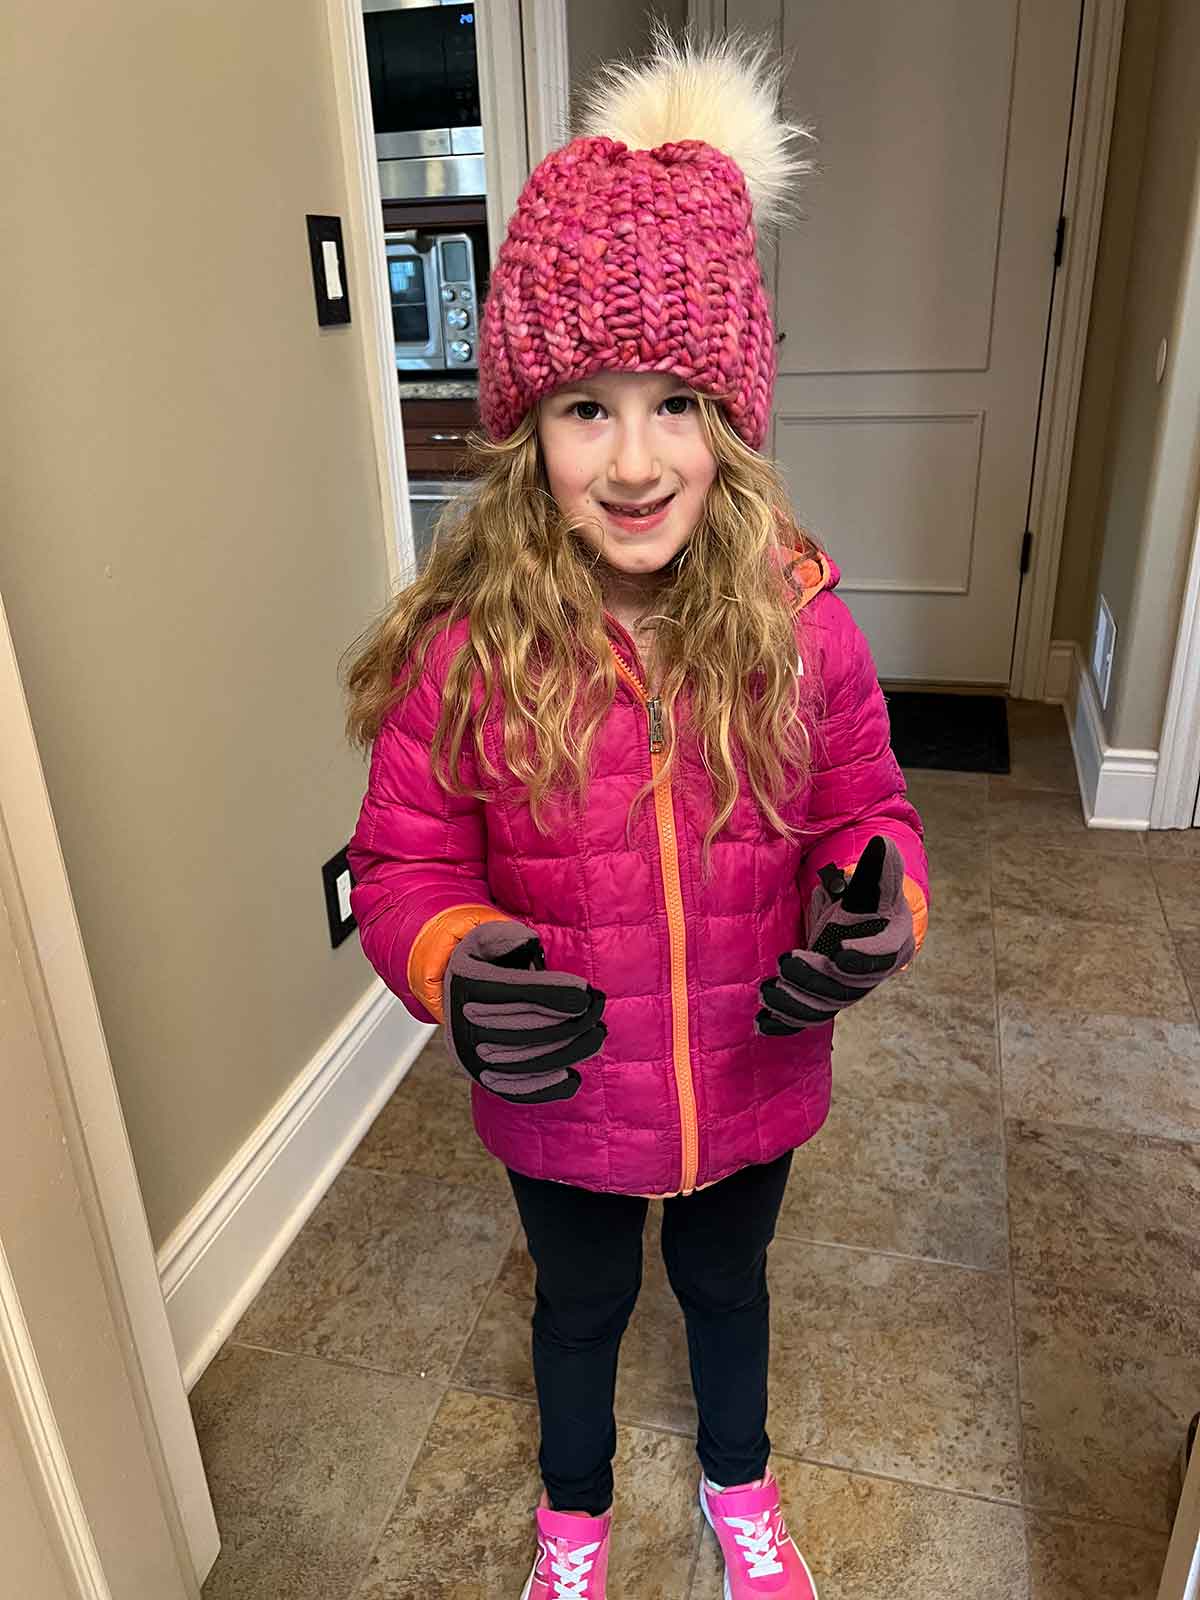 Little girl with blond curly hair in a pink winter jackets, pink hat, and gloves.